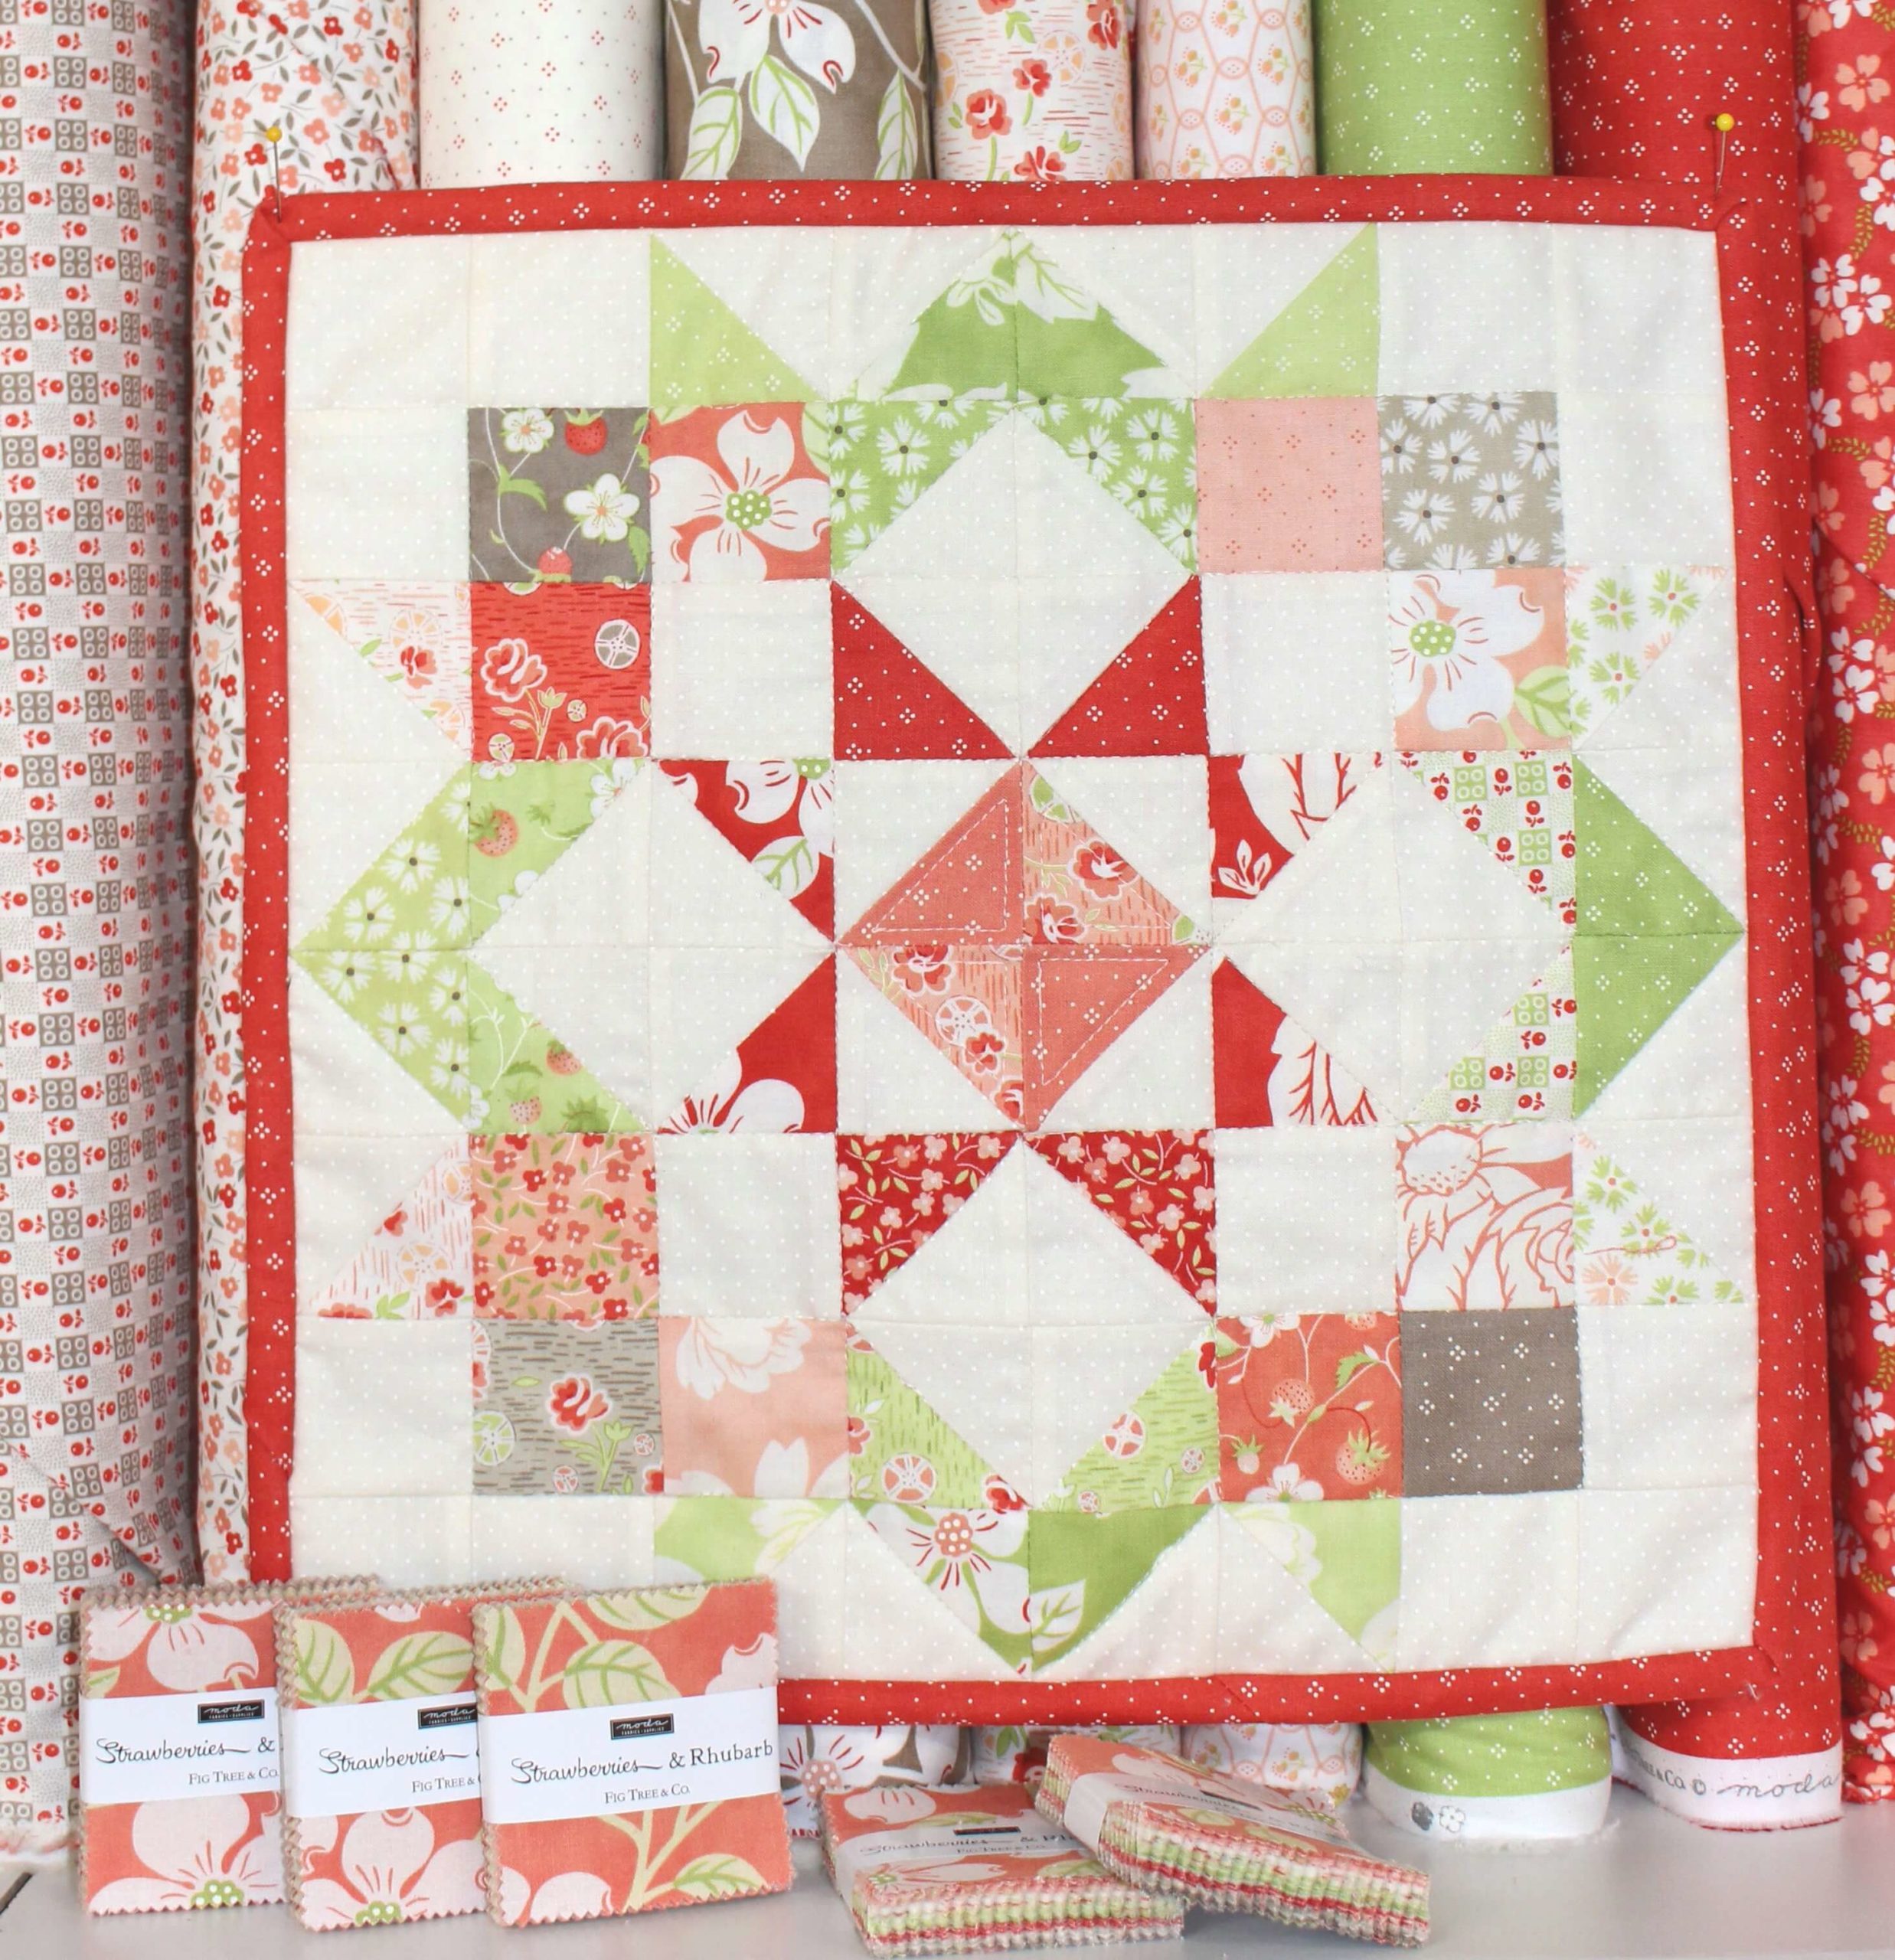 Sewing & Quilting Classes